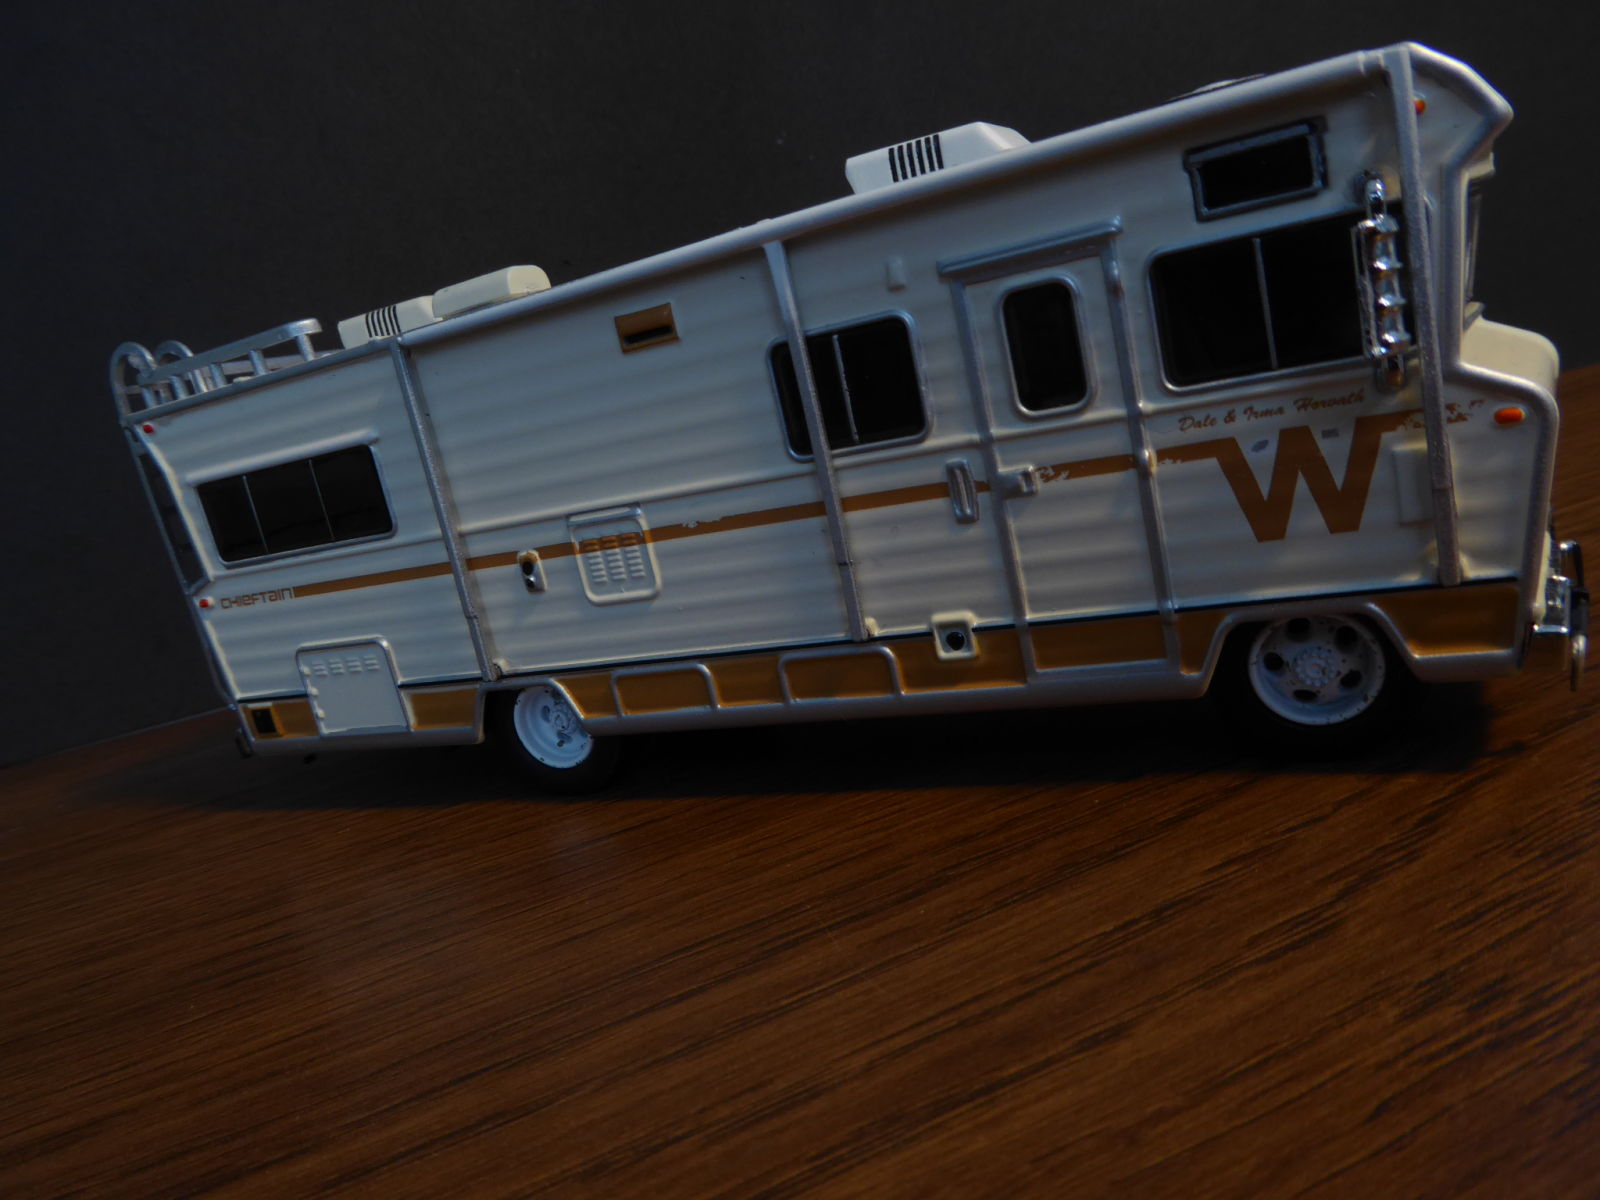 Illustration for article titled Lights, Camera, Wednesday Walking Dead with a Winnebago